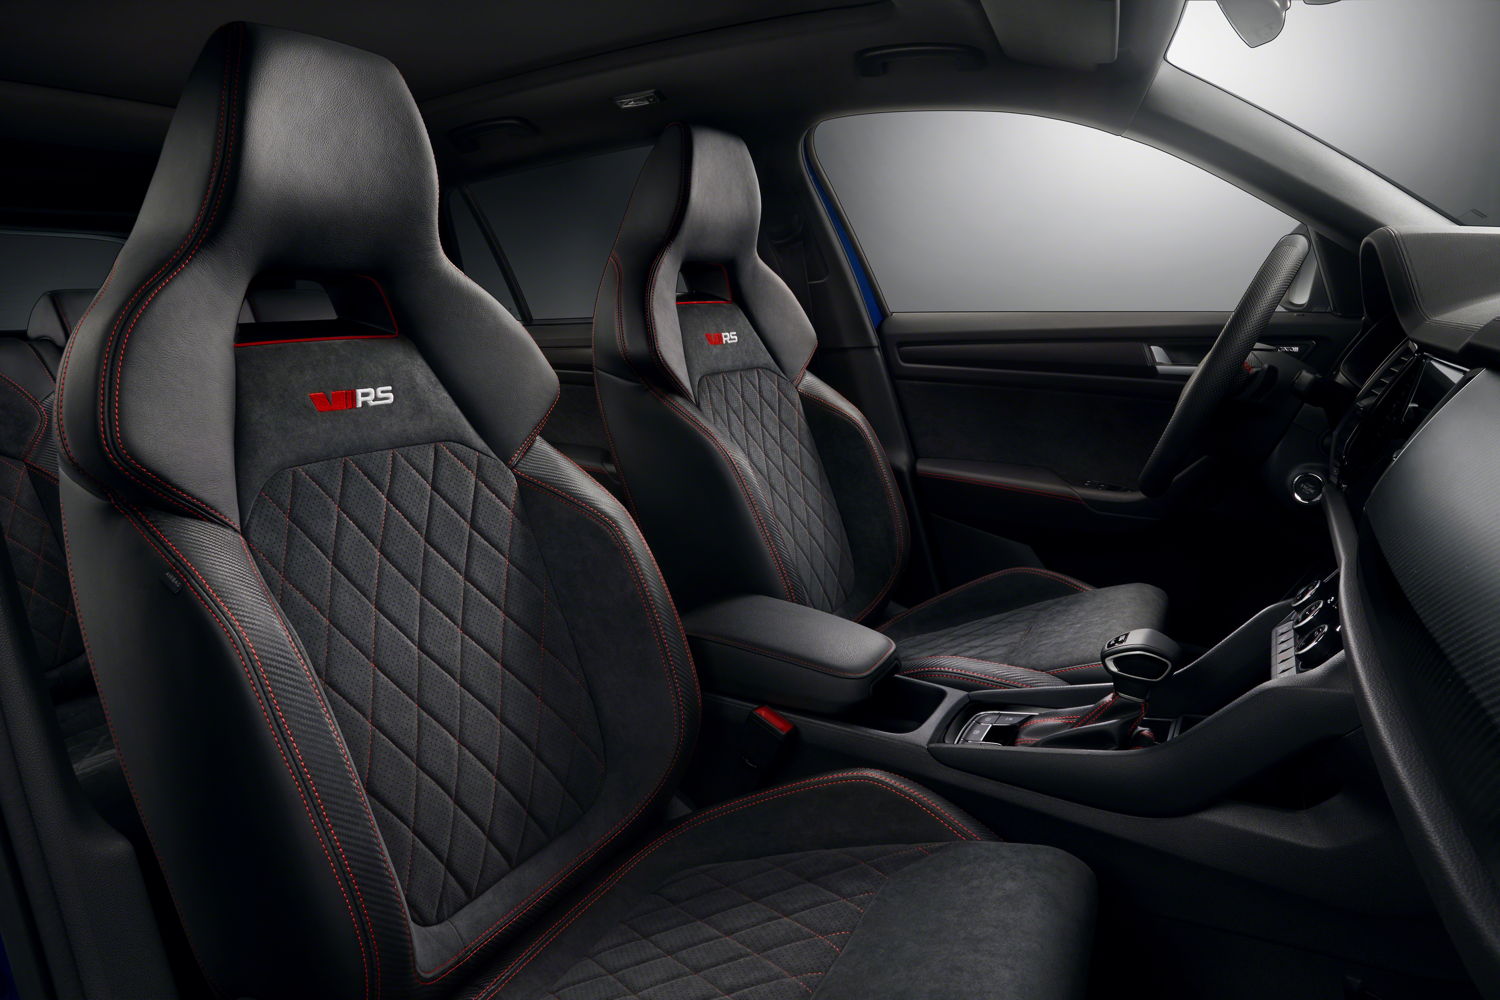 The sports seats in the new high-performance SUV feature perforated Alcantara and carbon leather with red contrast stitching.